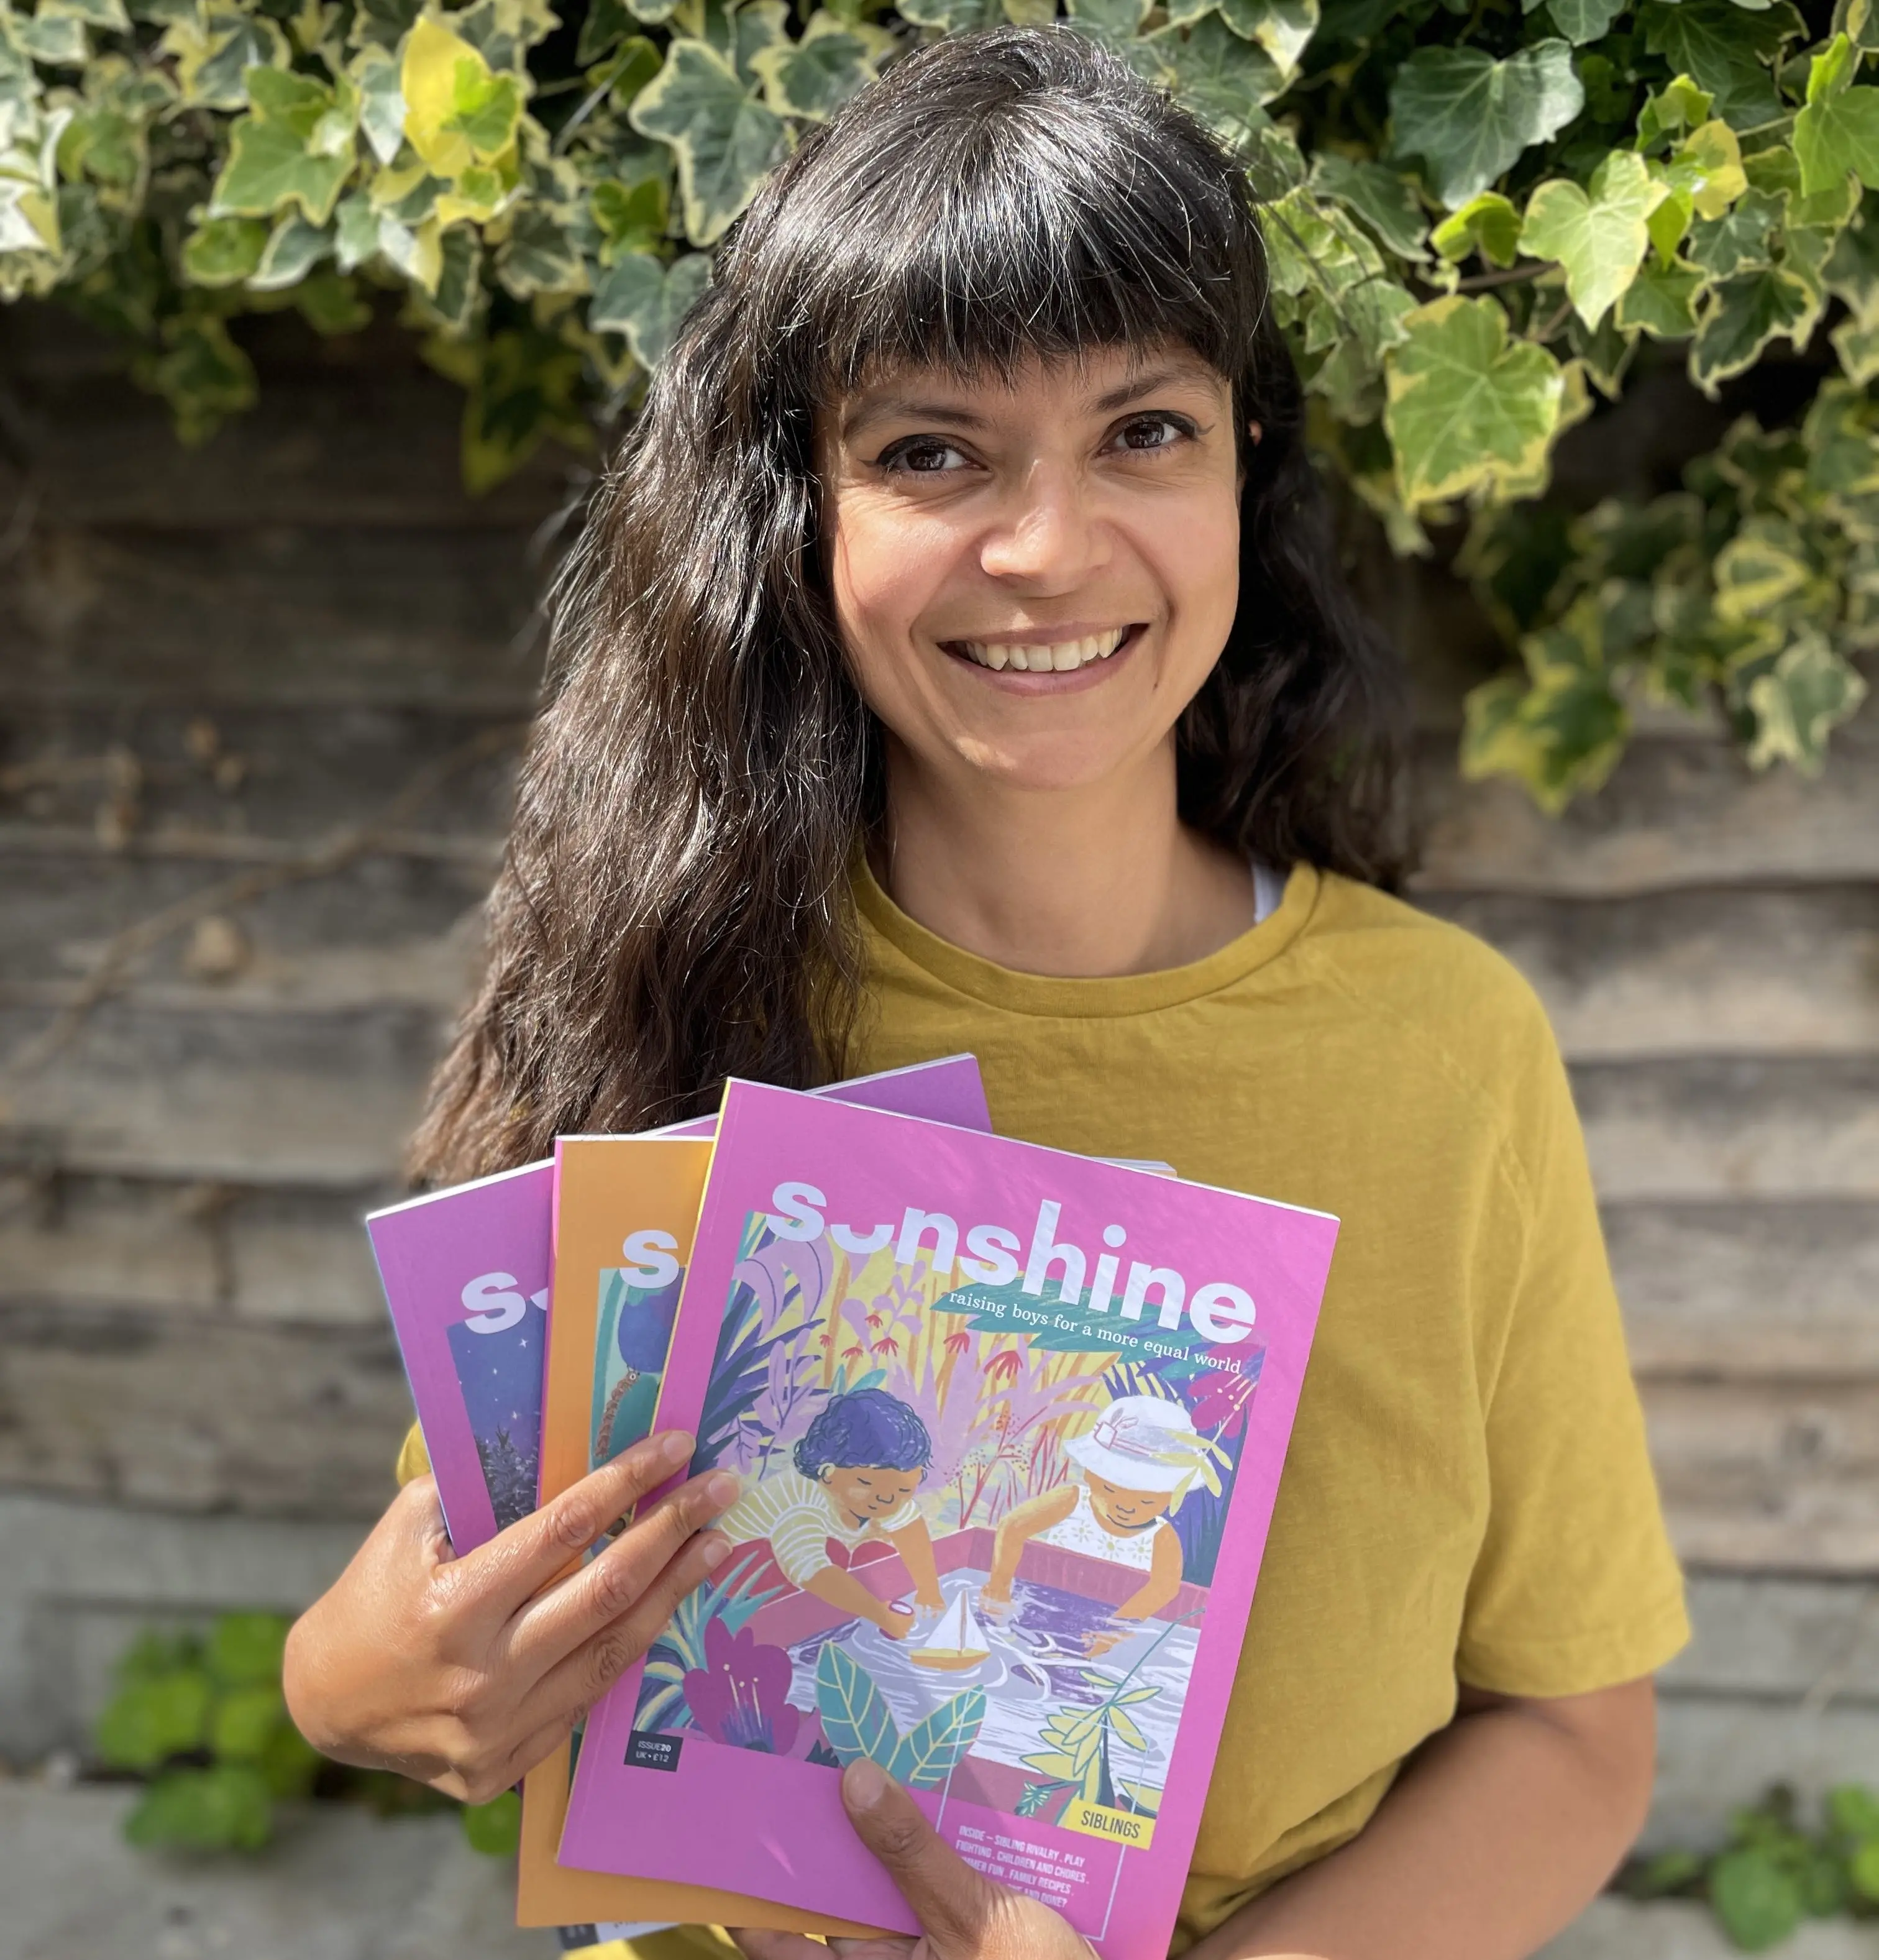 Kirstie wearing a yelllow shirt holding three issues of Sonshine Magazine against a garden background